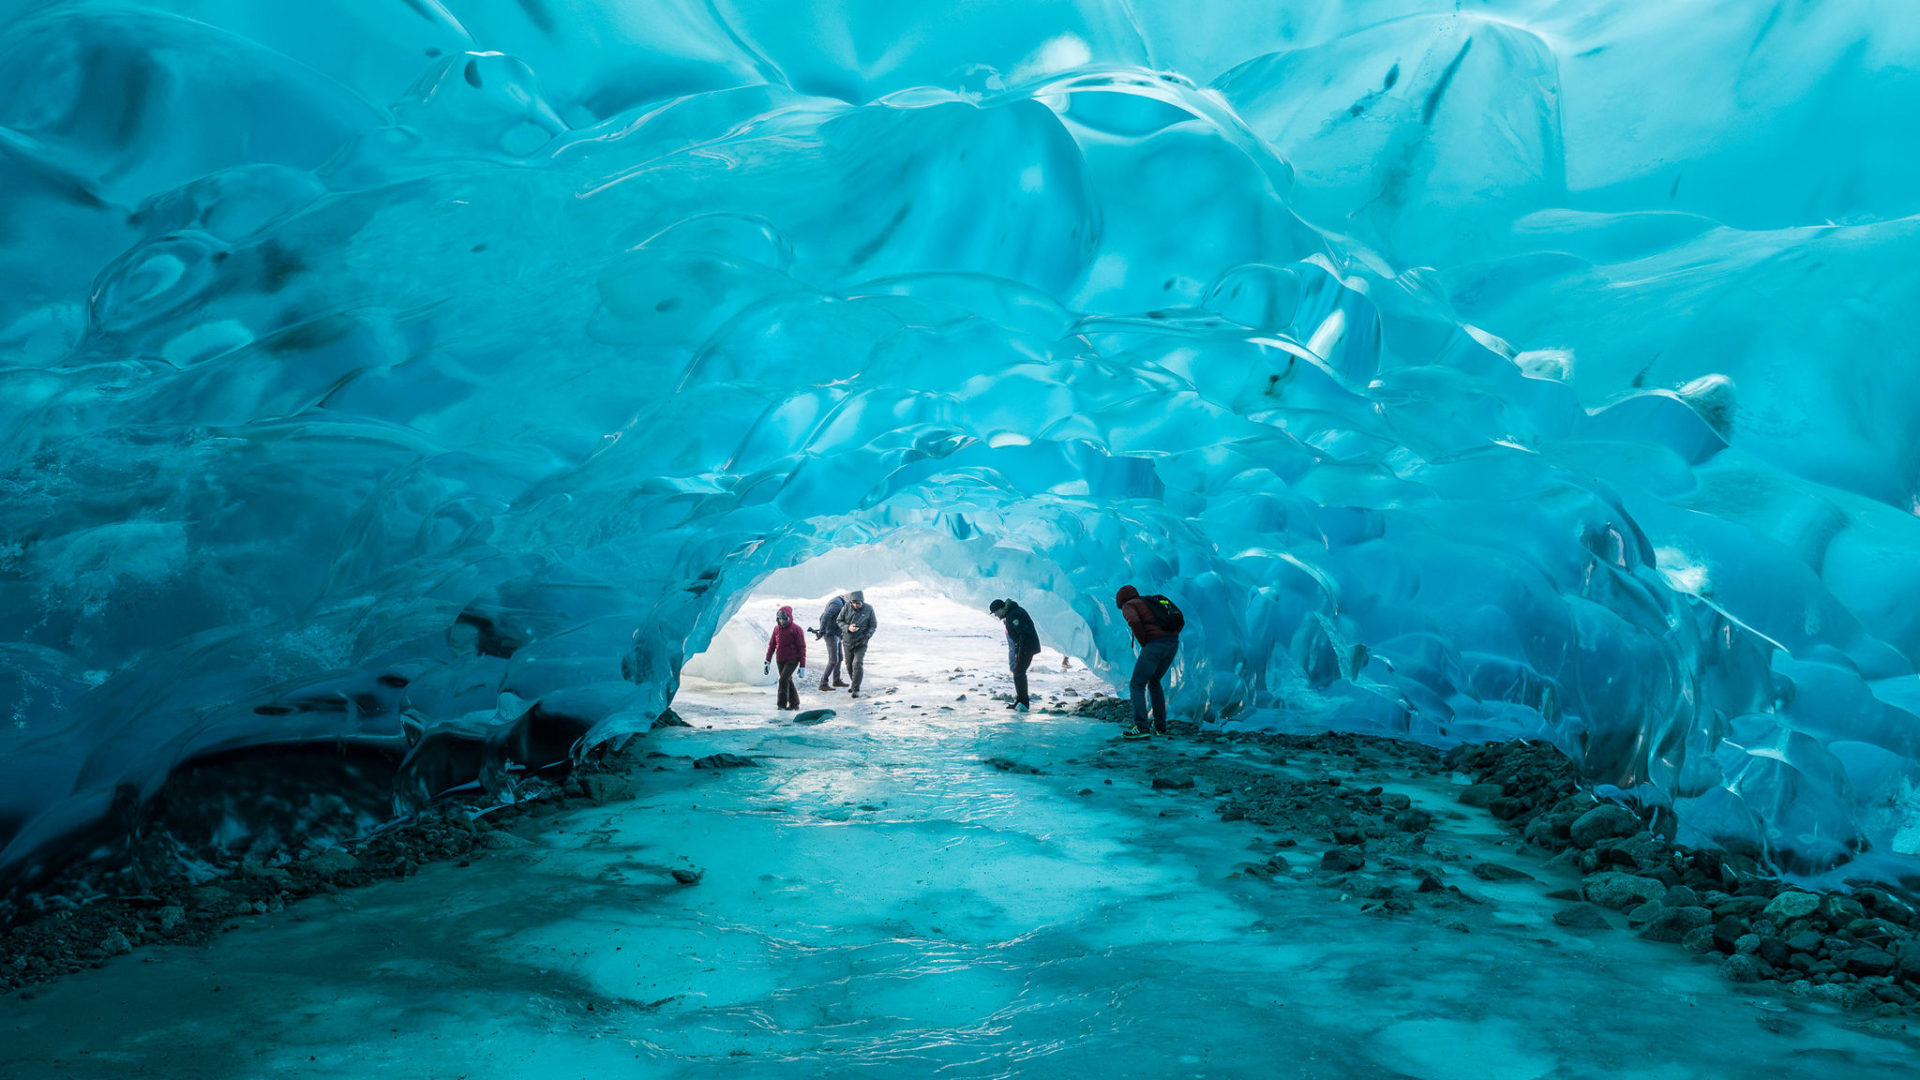 Mendenhall Ice Caves in Alaska are on the list of jaw-dropping natural marvels in the United States